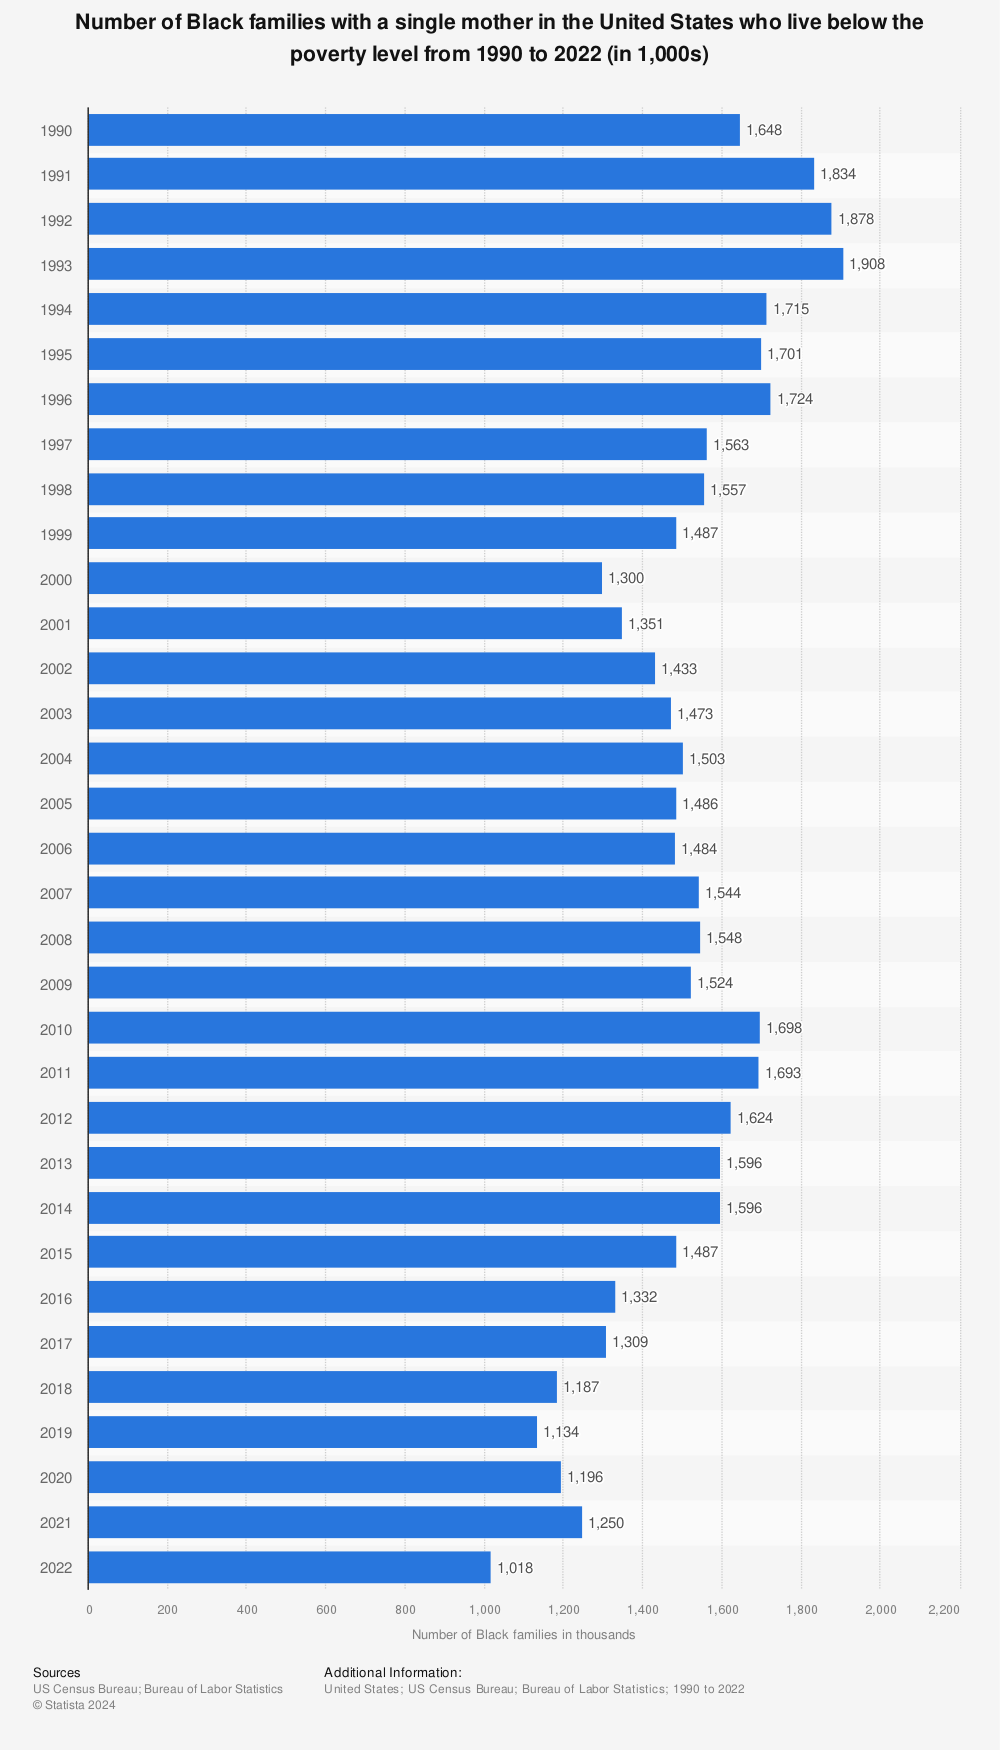 Statistic: Number of Black families with a single mother in the United States who live below the poverty level from 1990 to 2022 (in 1,000s) | Statista